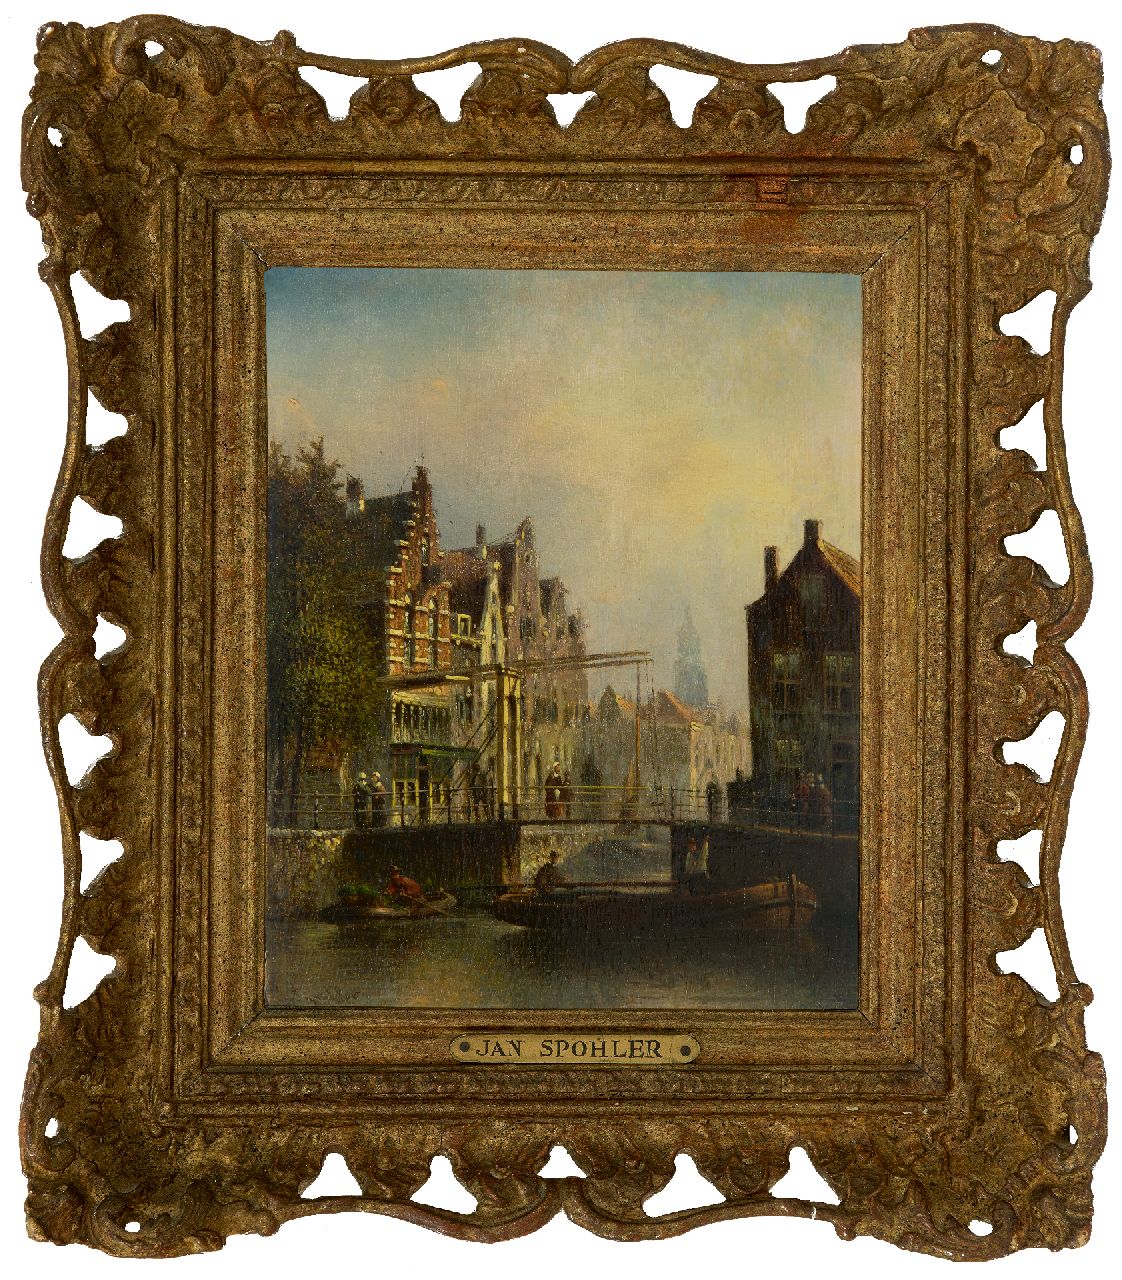 Spohler J.F.  | Johannes Franciscus Spohler | Paintings offered for sale | A Dutch town with a drawbridge, oil on panel 20.4 x 16.0 cm, signed l.l. and ?